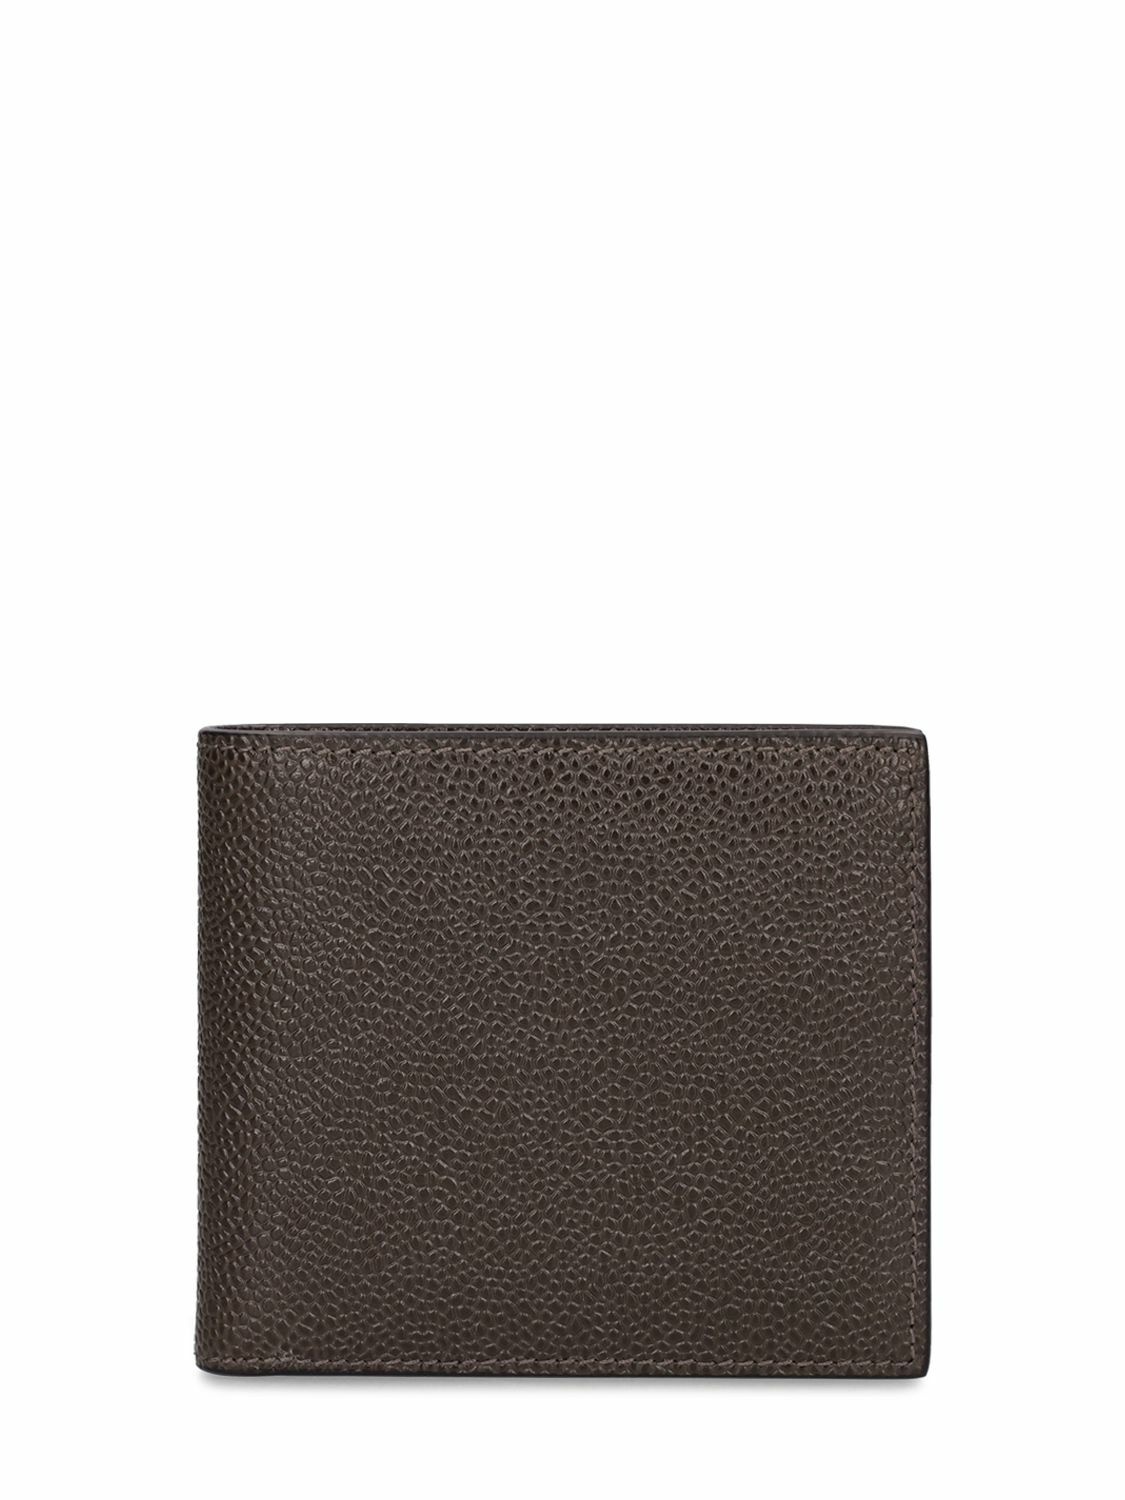 Photo: THOM BROWNE - Grained Leather Billfold Wallet